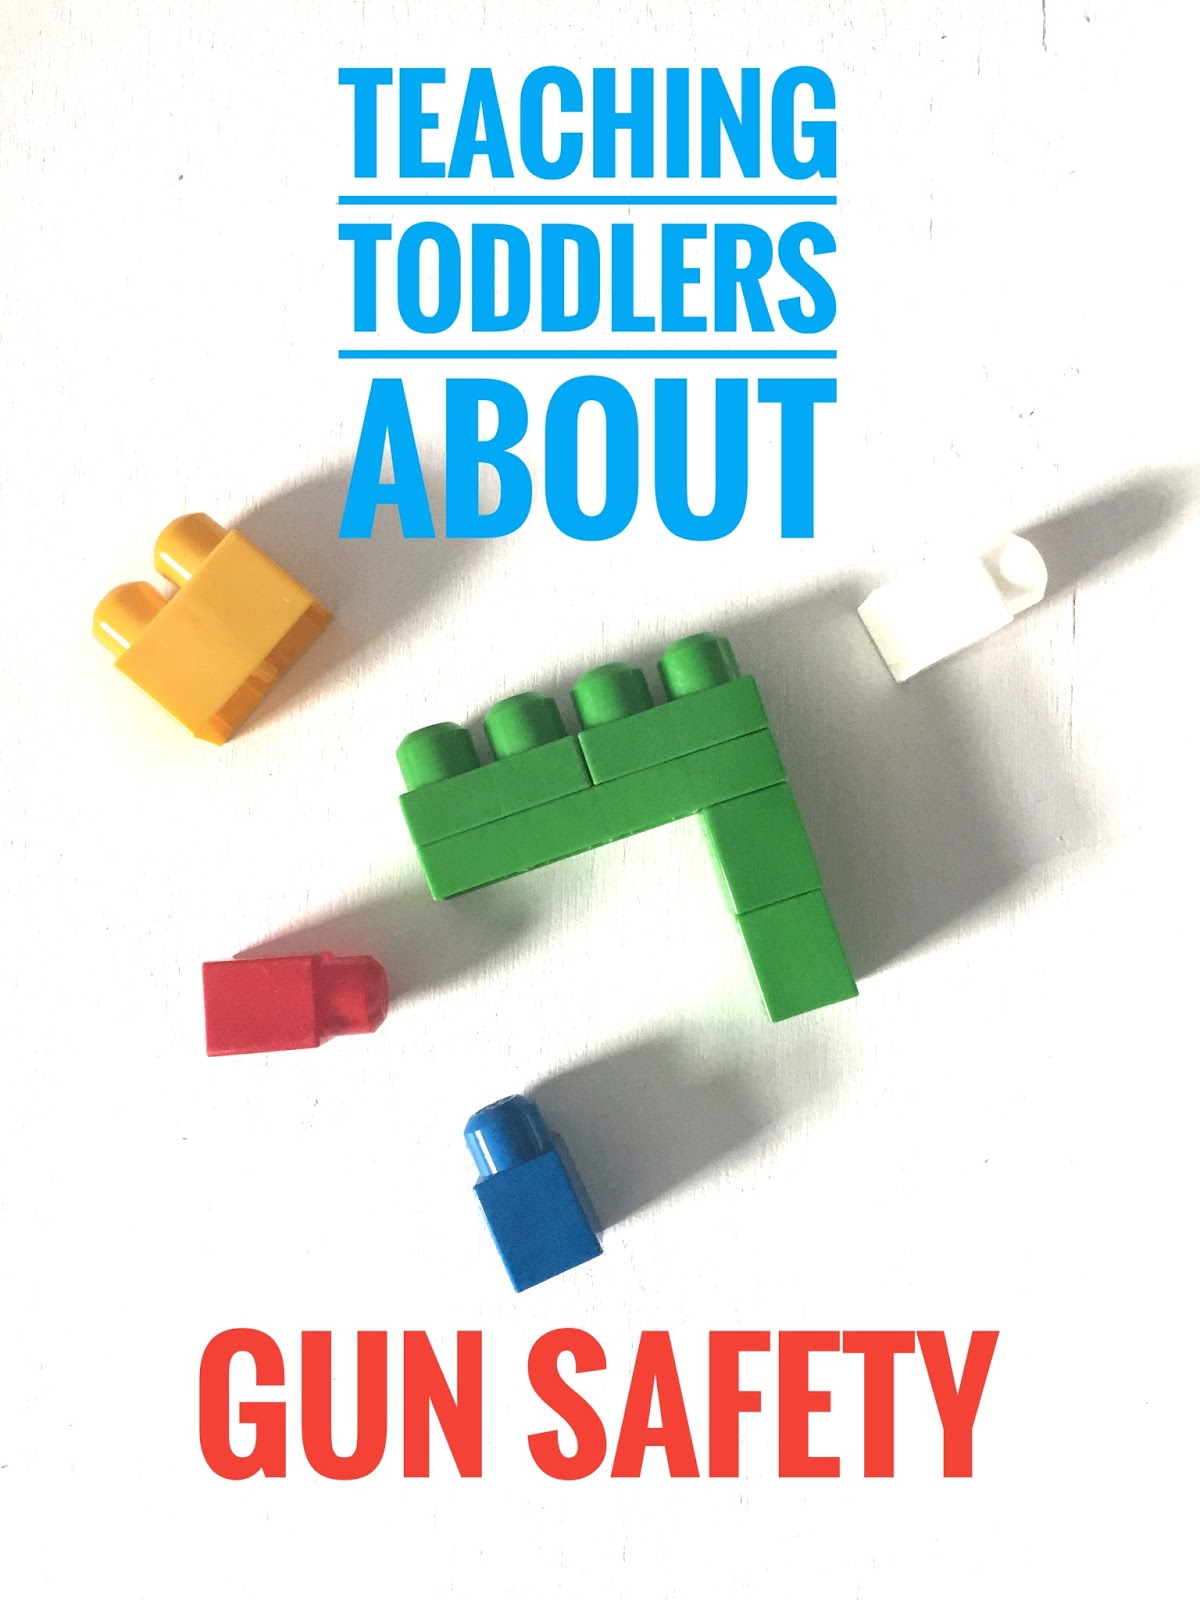 How to Teach Toddlers About Gun Safety Adventures at Home